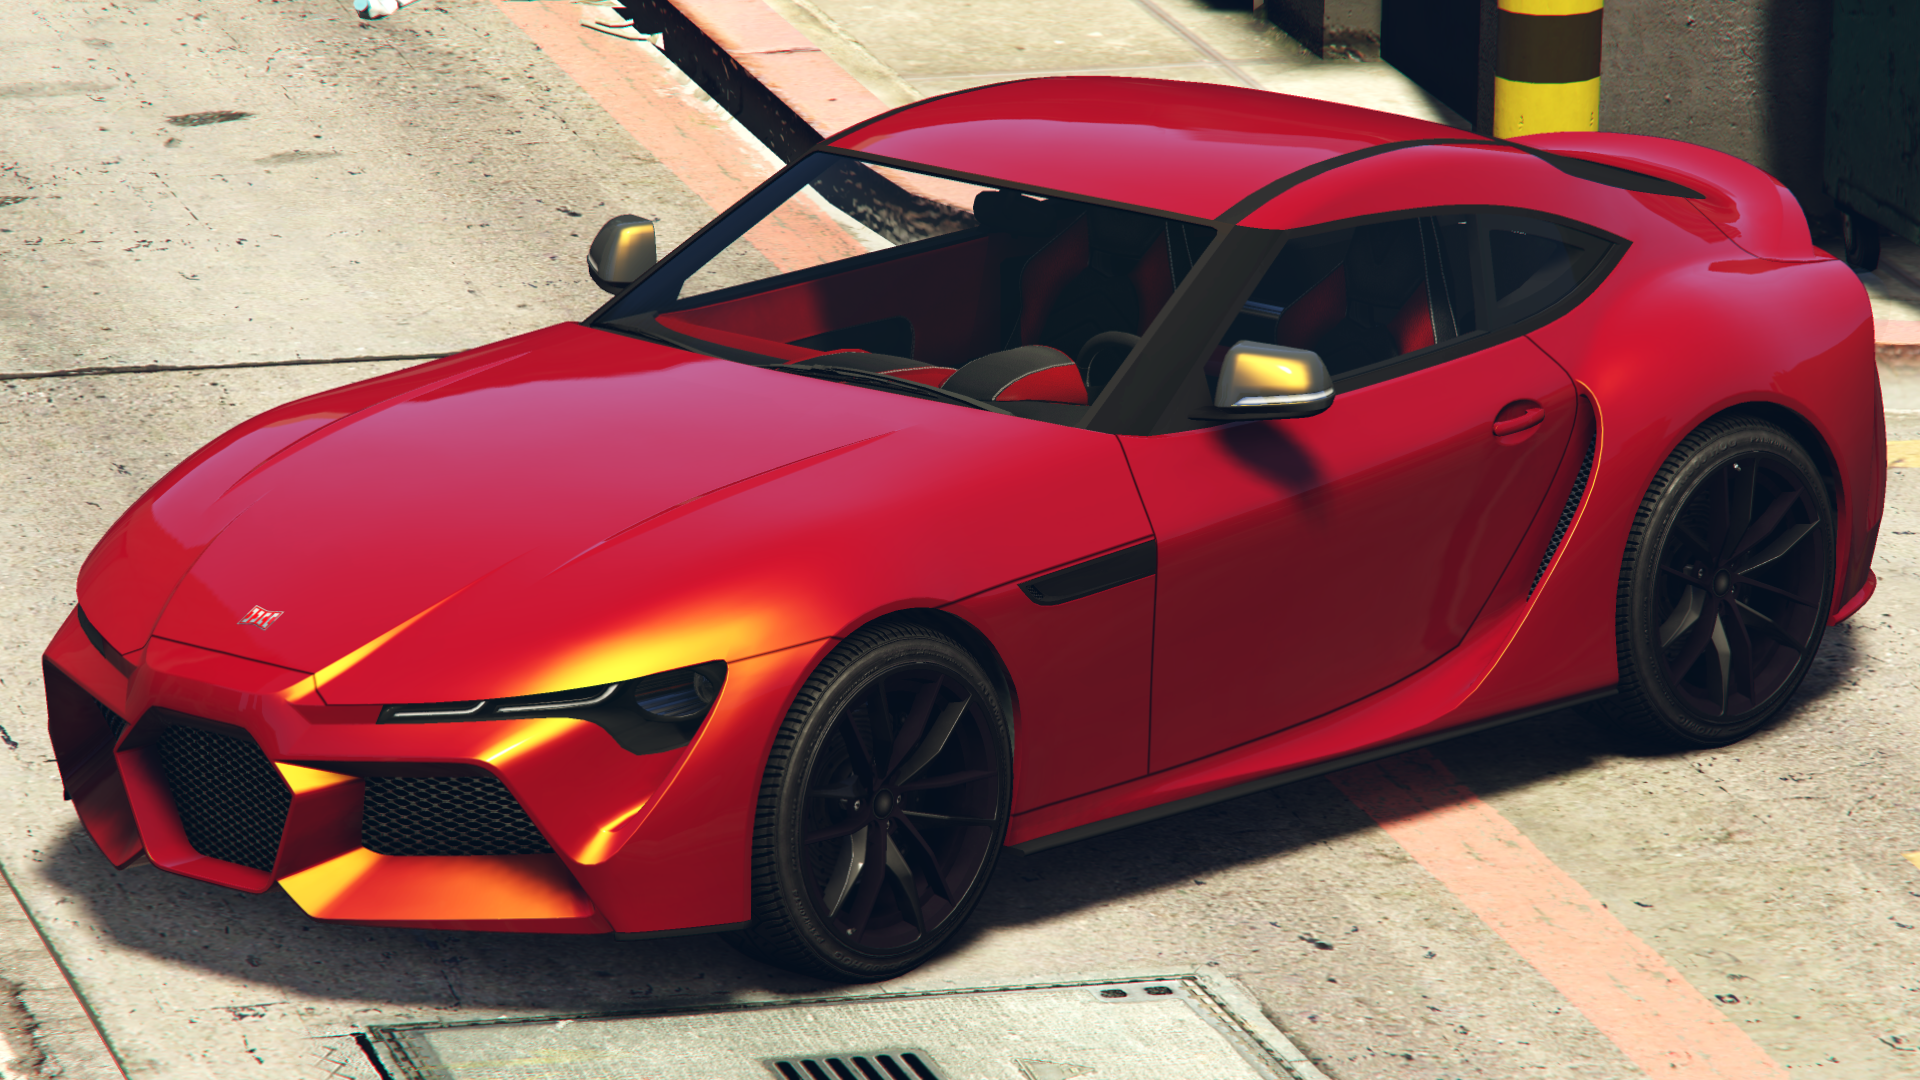 Dinka Jester Classic  GTA 5 Online Vehicle Stats, Price, How To Get